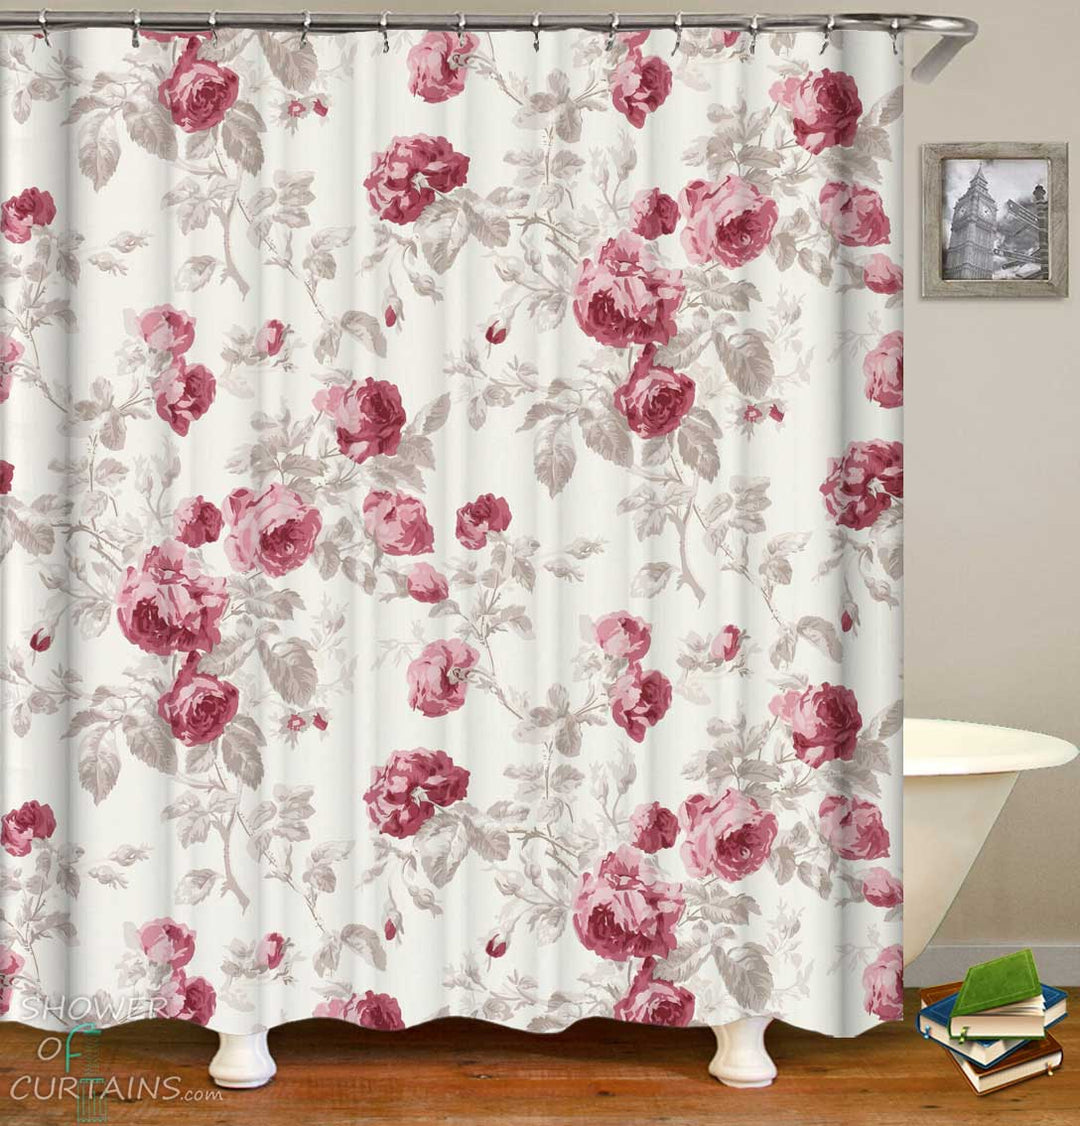 Shower Curtains with Vintage Chic Roses